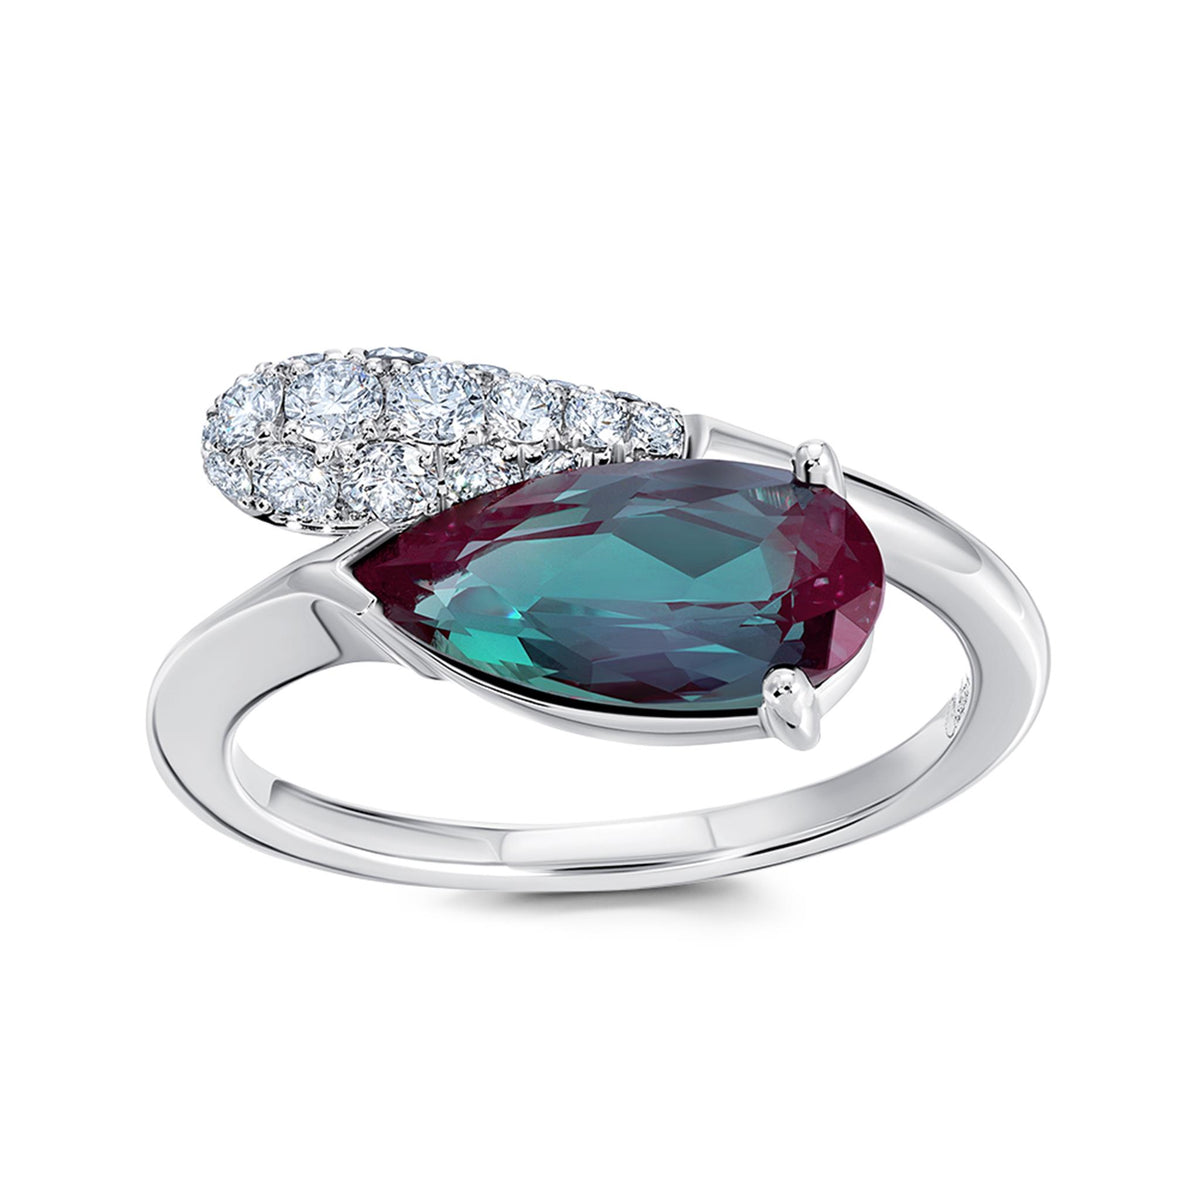 14Kt White Gold Ring With 2.38ct Chatham Lab Created Alexandrite